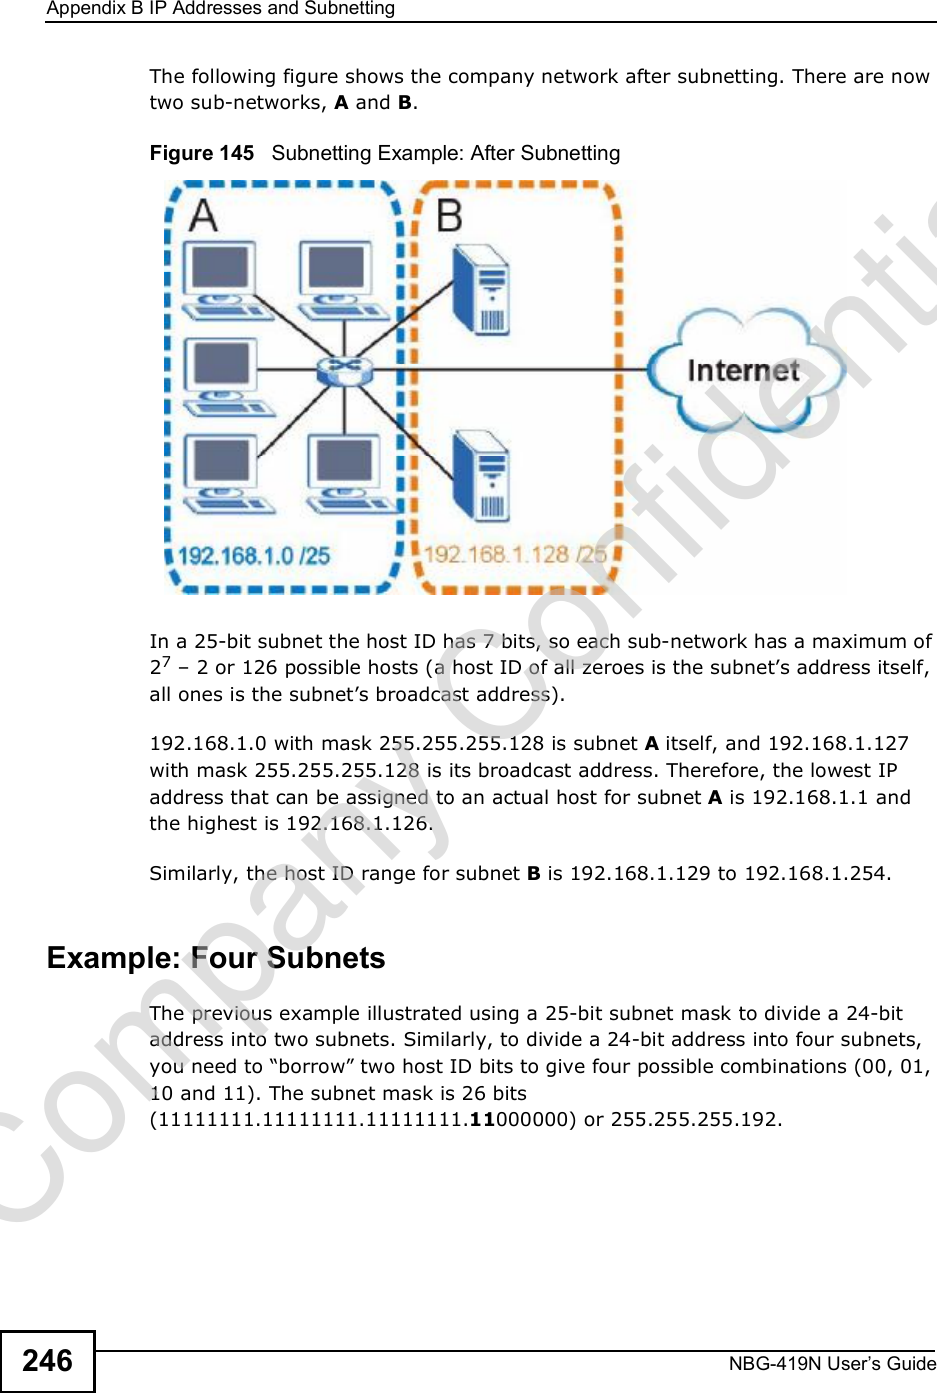 Appendix BIP Addresses and SubnettingNBG-419N User s Guide246The following figure shows the company network after subnetting. There are now two sub-networks, A and B. Figure 145   Subnetting Example: After SubnettingIn a 25-bit subnet the host ID has 7 bits, so each sub-network has a maximum of 27 $ 2 or 126 possible hosts (a host ID of all zeroes is the subnet!s address itself, all ones is the subnet!s broadcast address).192.168.1.0 with mask 255.255.255.128 is subnet A itself, and 192.168.1.127 with mask 255.255.255.128 is its broadcast address. Therefore, the lowest IP address that can be assigned to an actual host for subnet A is 192.168.1.1 and the highest is 192.168.1.126. Similarly, the host ID range for subnet B is 192.168.1.129 to 192.168.1.254.Example: Four Subnets The previous example illustrated using a 25-bit subnet mask to divide a 24-bit address into two subnets. Similarly, to divide a 24-bit address into four subnets, you need to &quot;borrow# two host ID bits to give four possible combinations (00, 01, 10 and 11). The subnet mask is 26 bits (11111111.11111111.11111111.11000000) or 255.255.255.192. Company Confidential